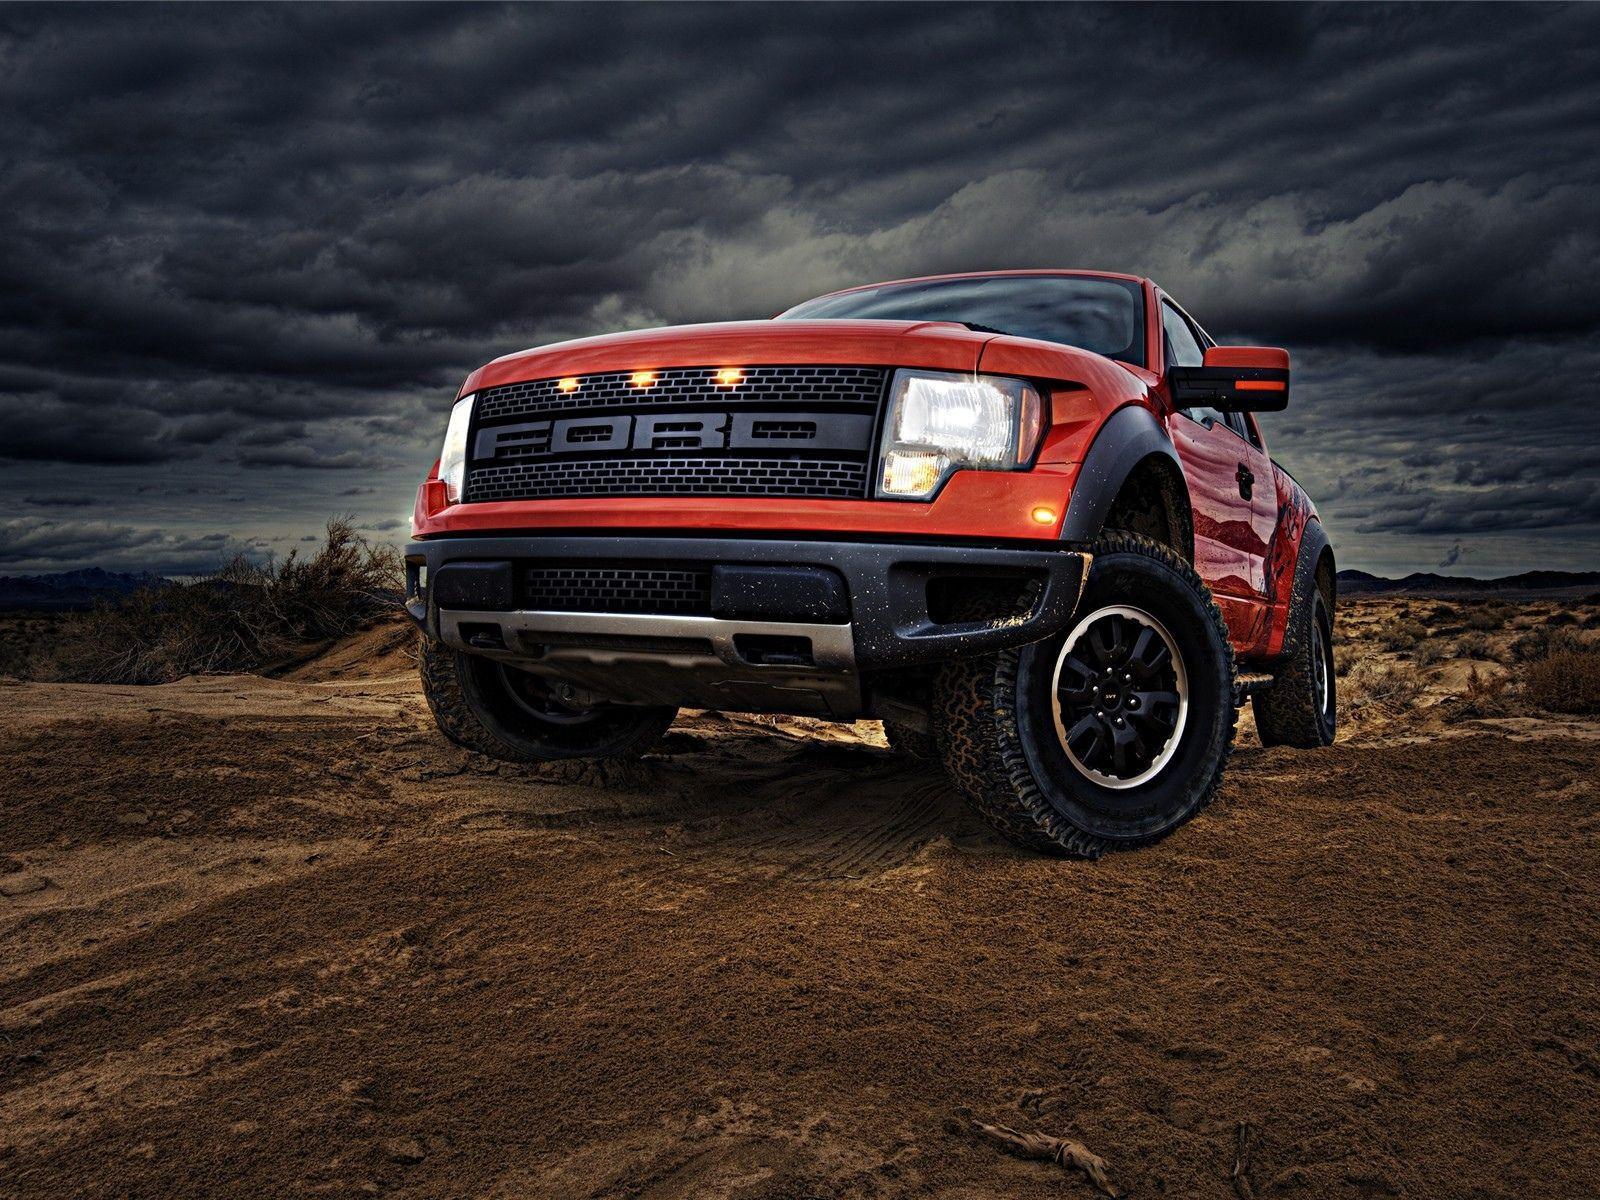 50 Ford Raptor HD Wallpapers